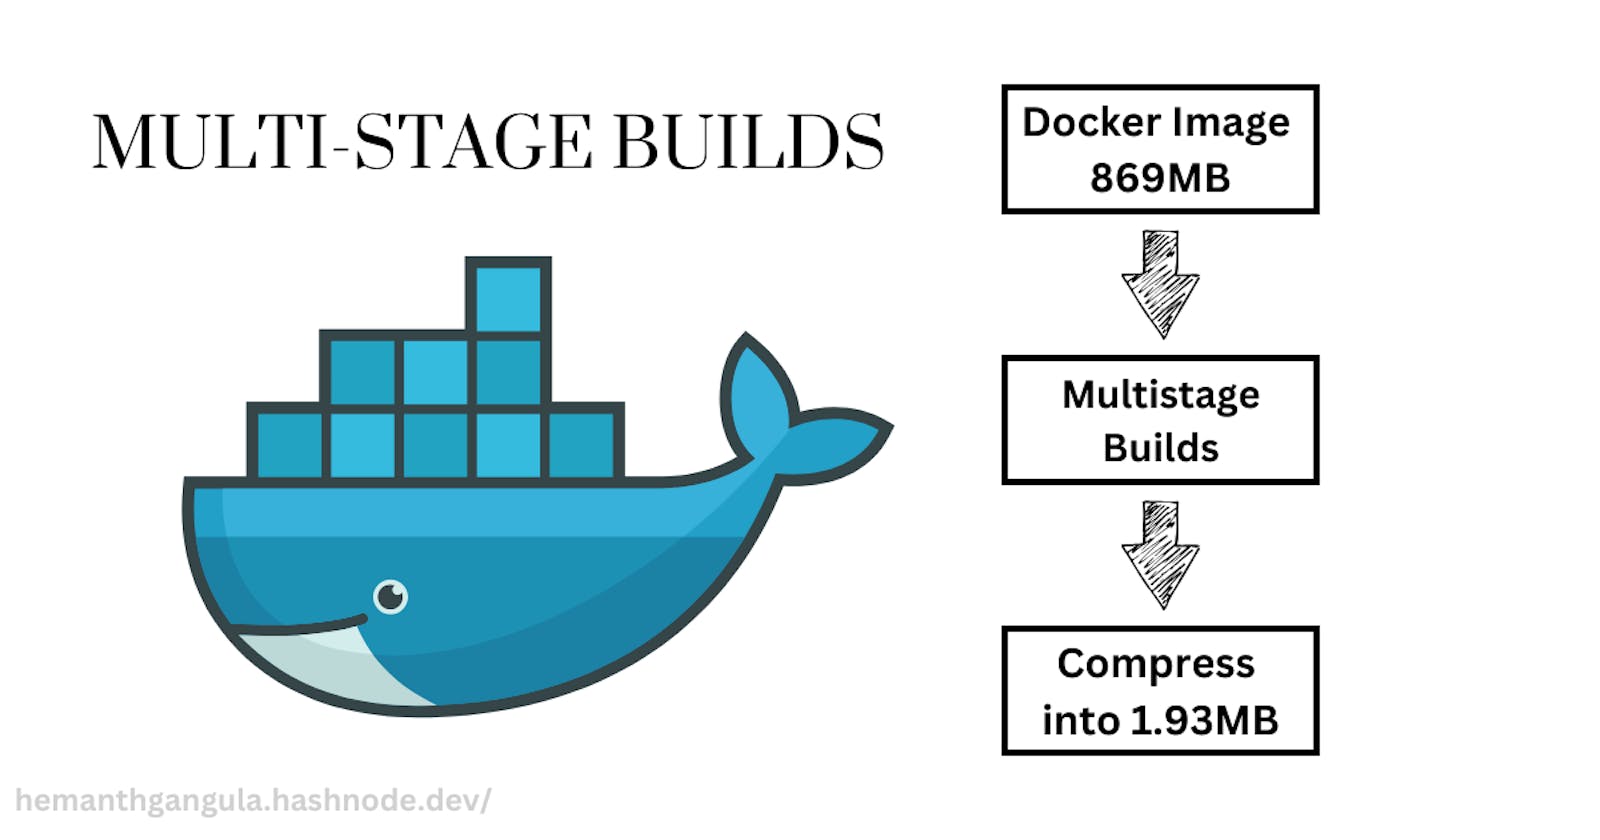 Dive into Docker's Multi-Stage Builds